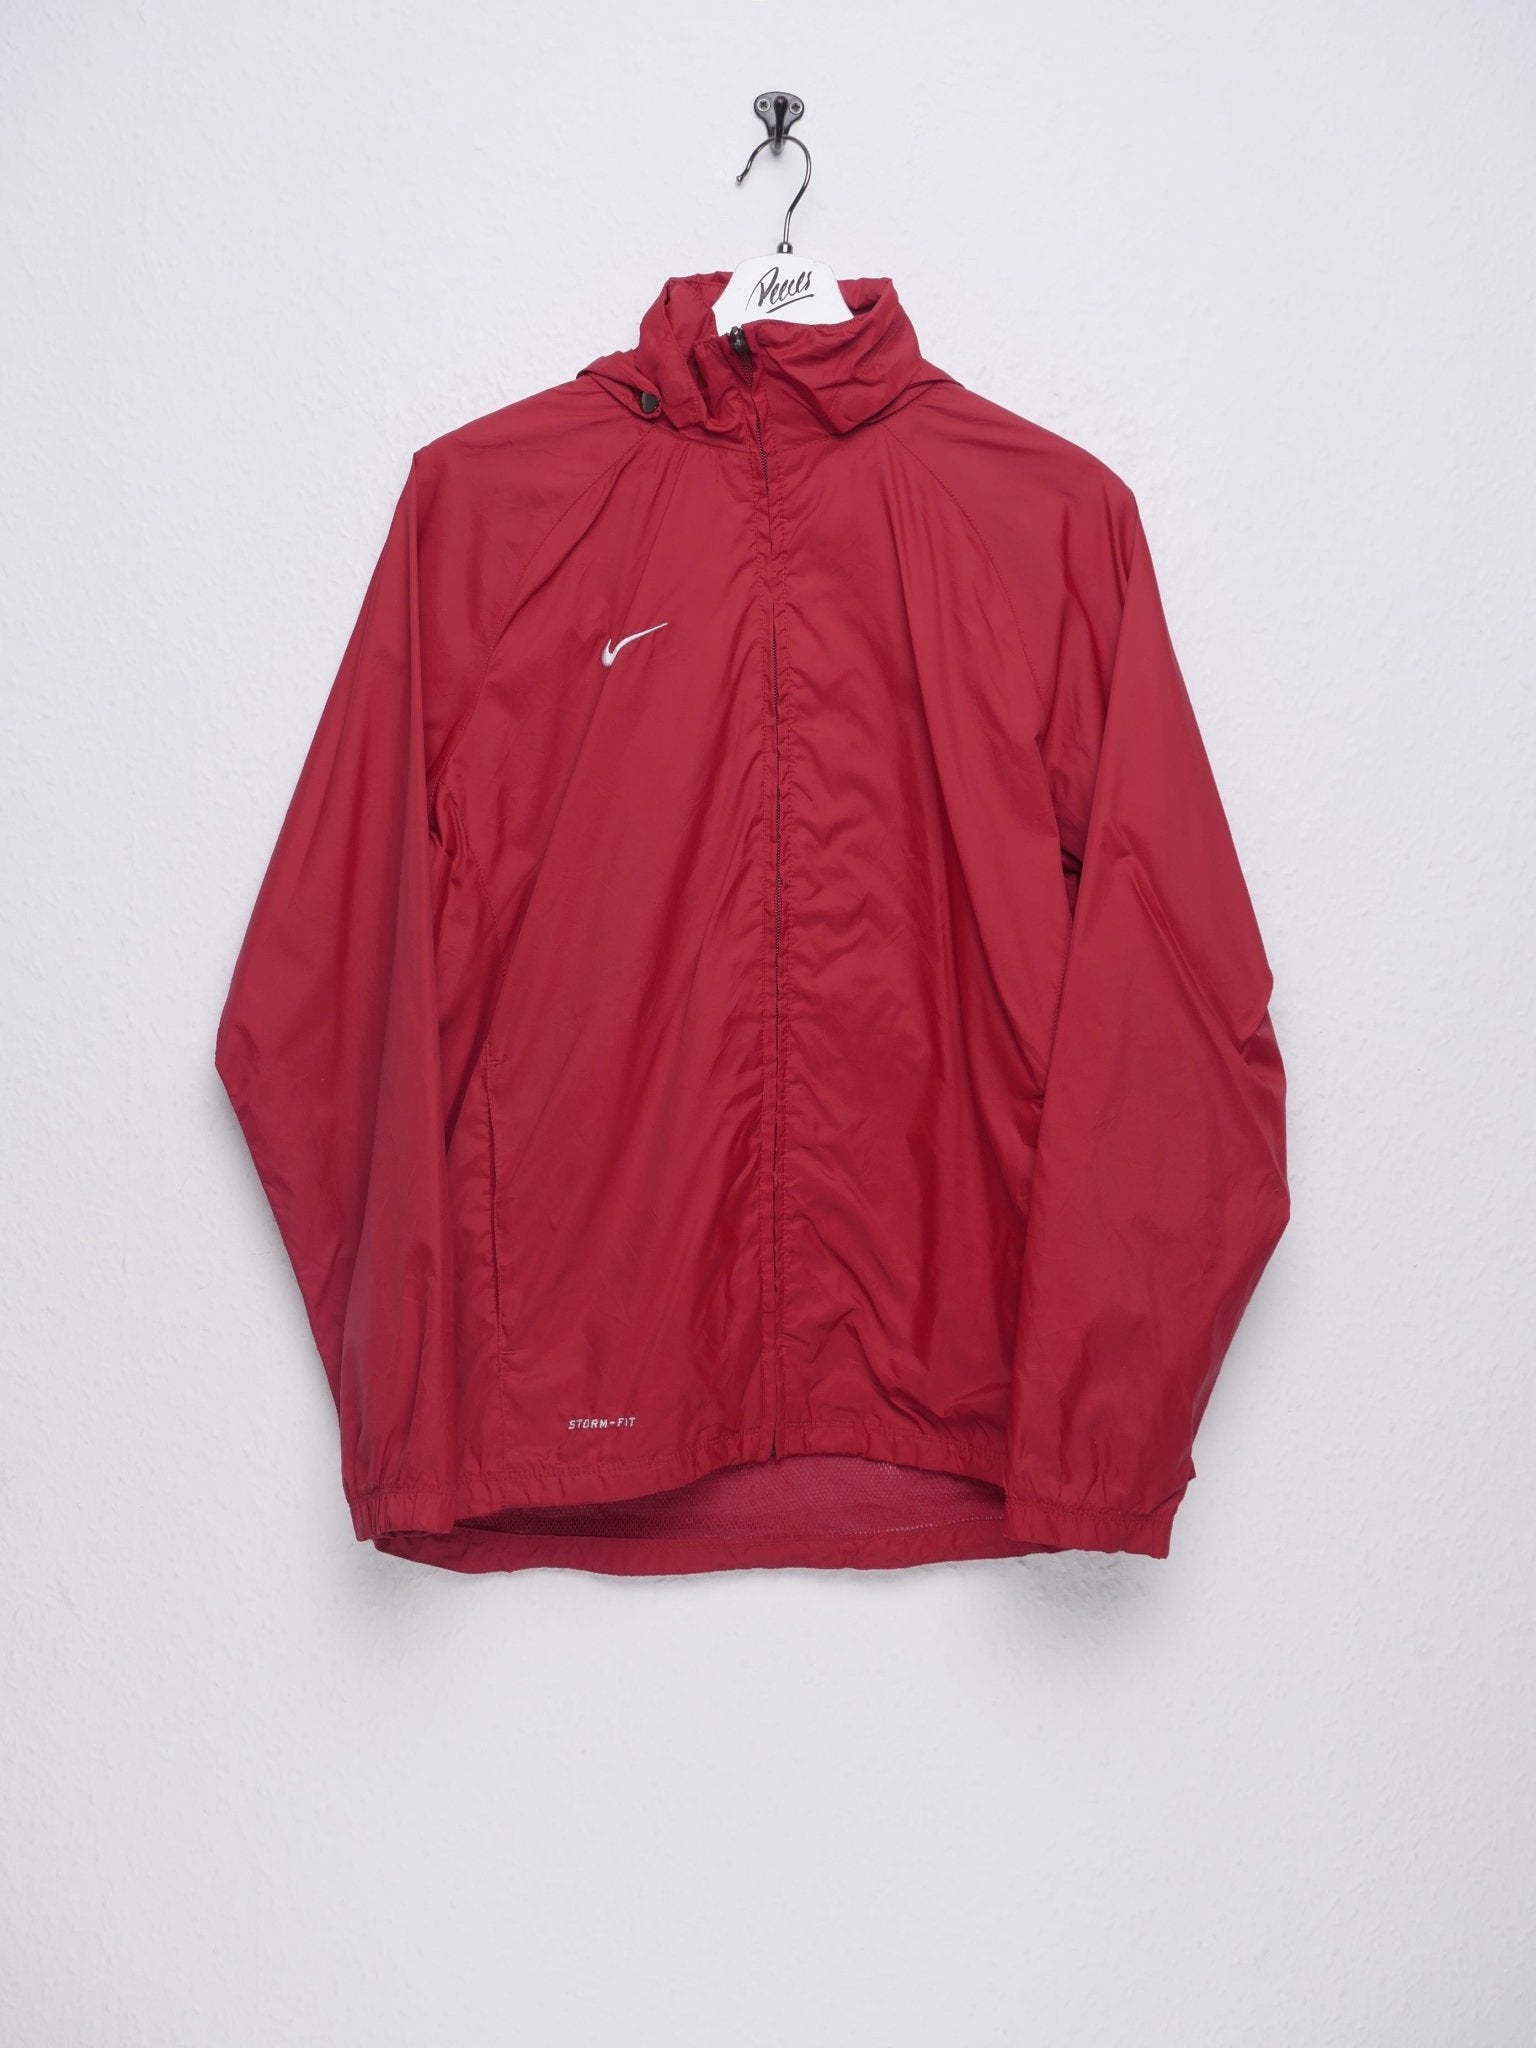 Nike embroidered Swoosh red Track Jacke - Peeces